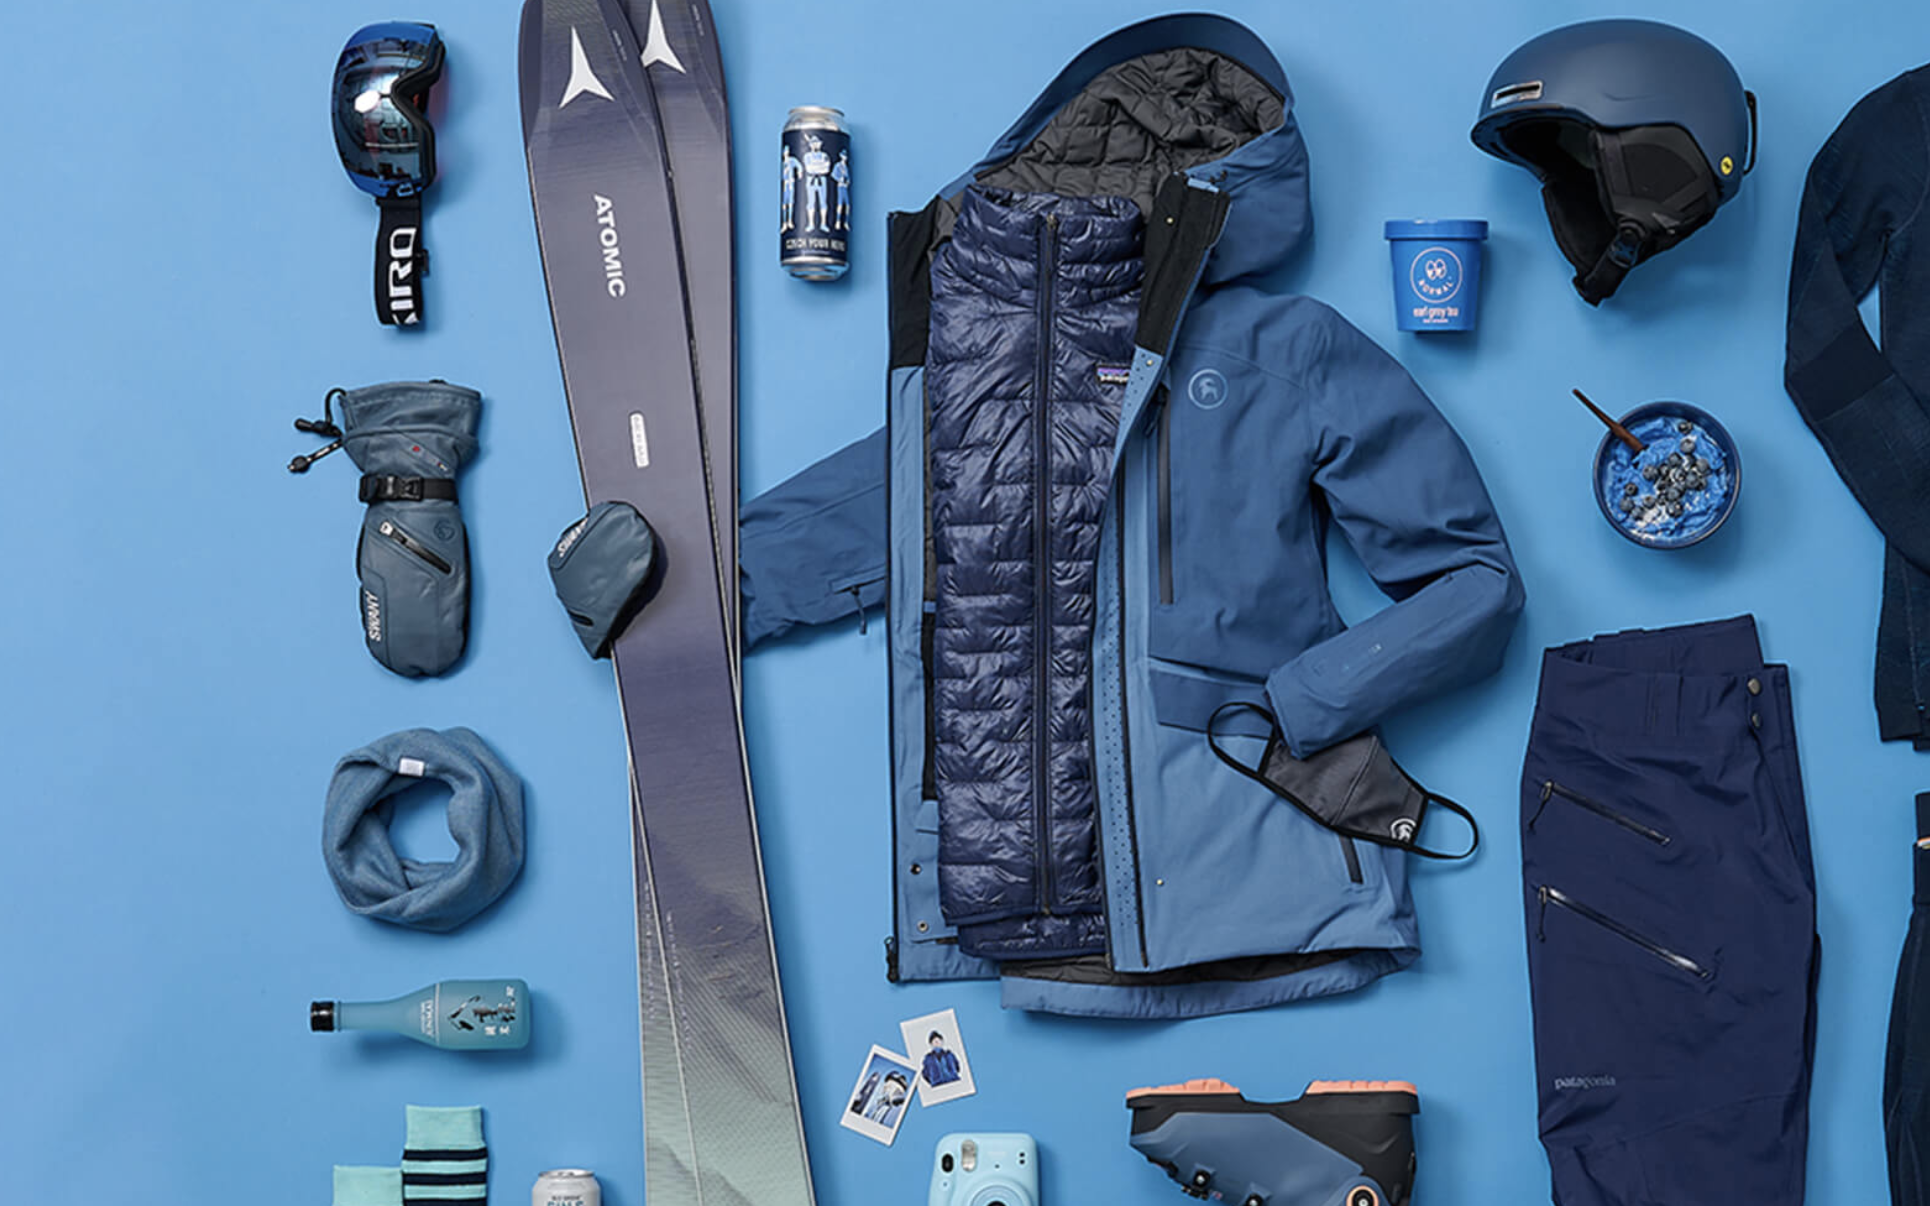 Backcountry Winter Semi Annual Sale Has Big Brands For Up To 50 Off